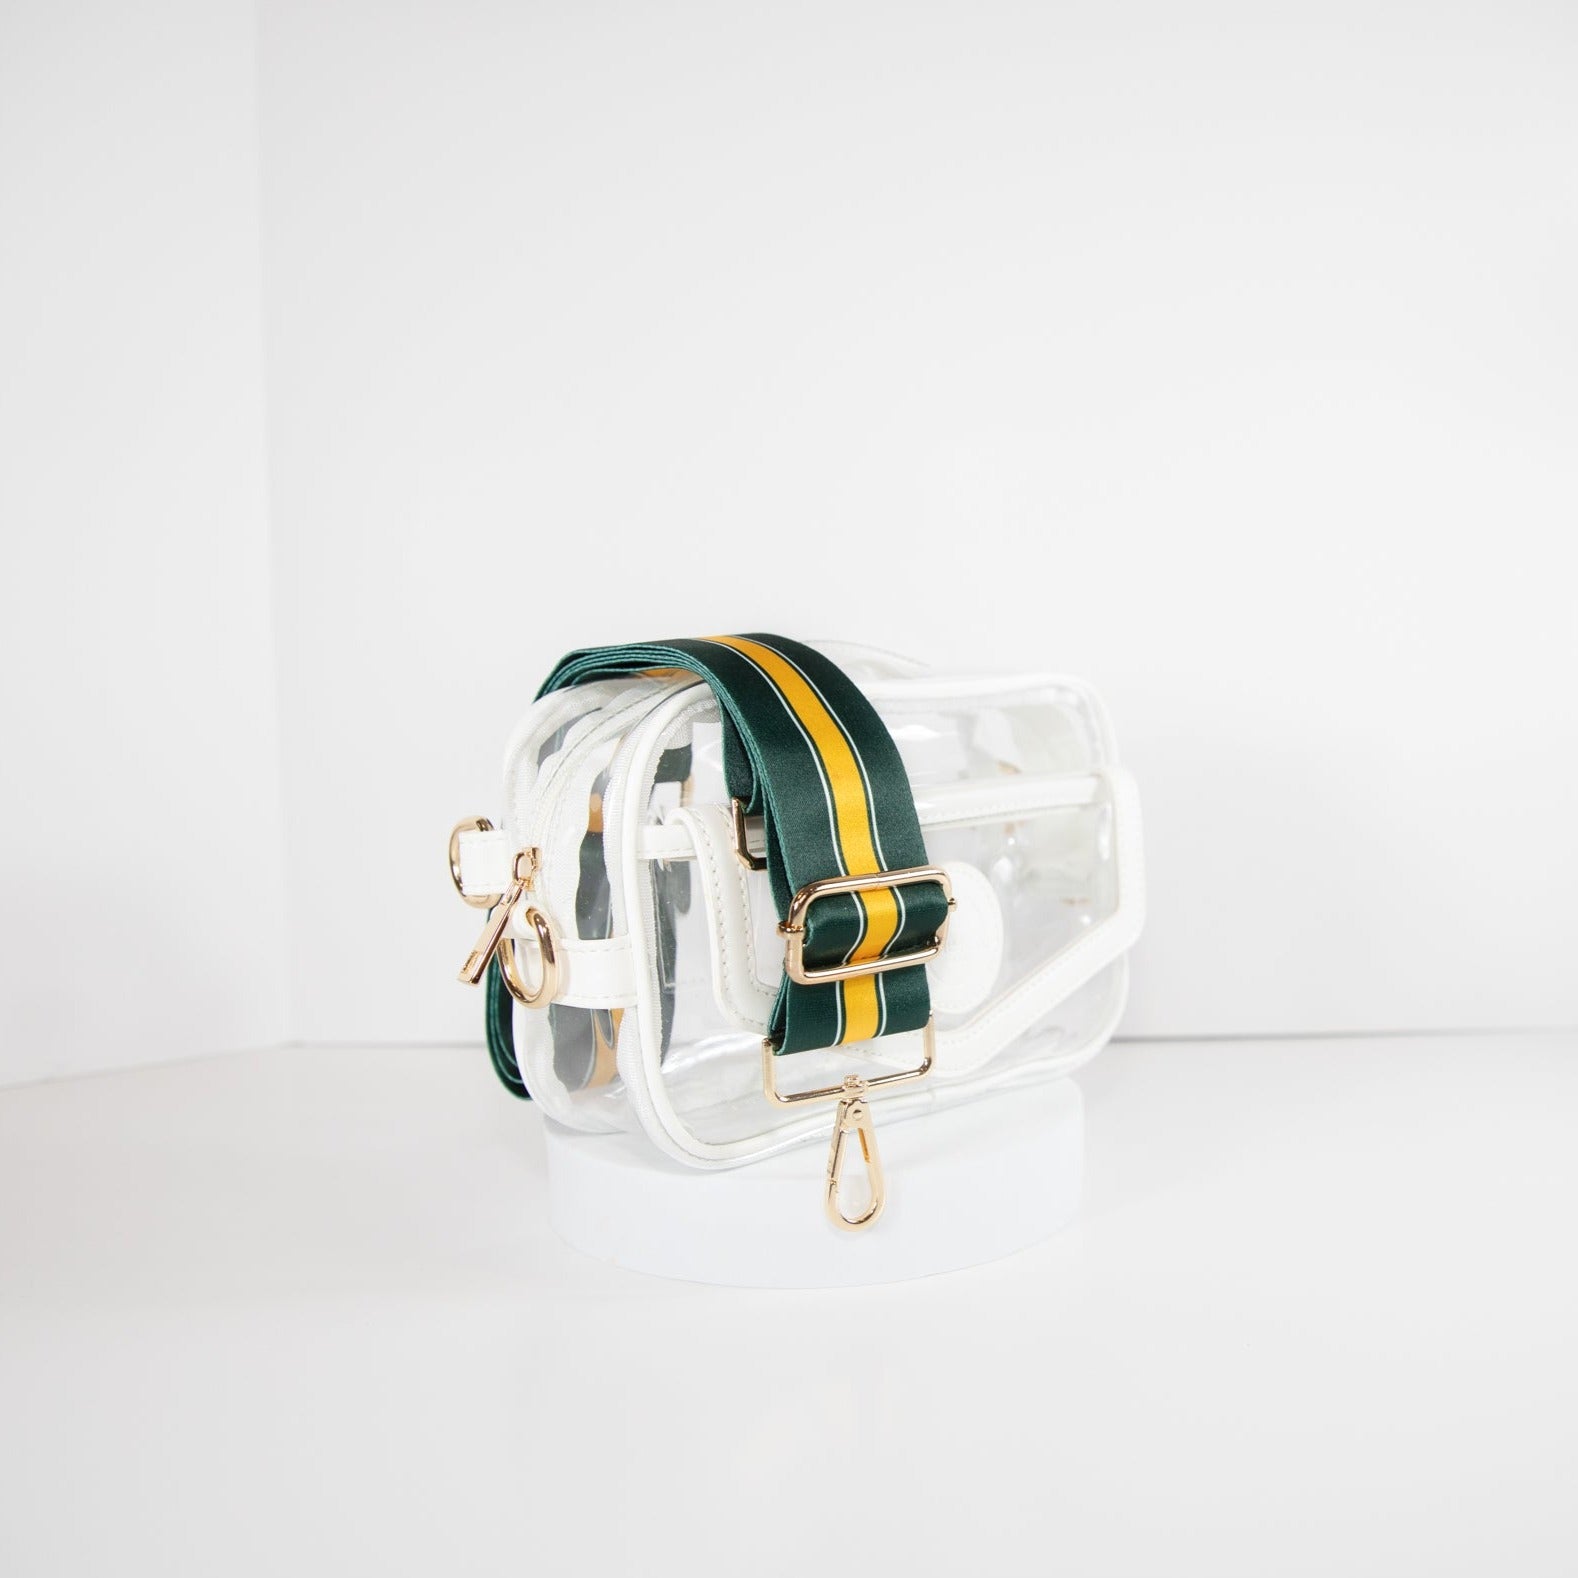 Clear Stadium Bag in white leather trim, side facing, with a strap in the team colors of the Green Bay Packers.